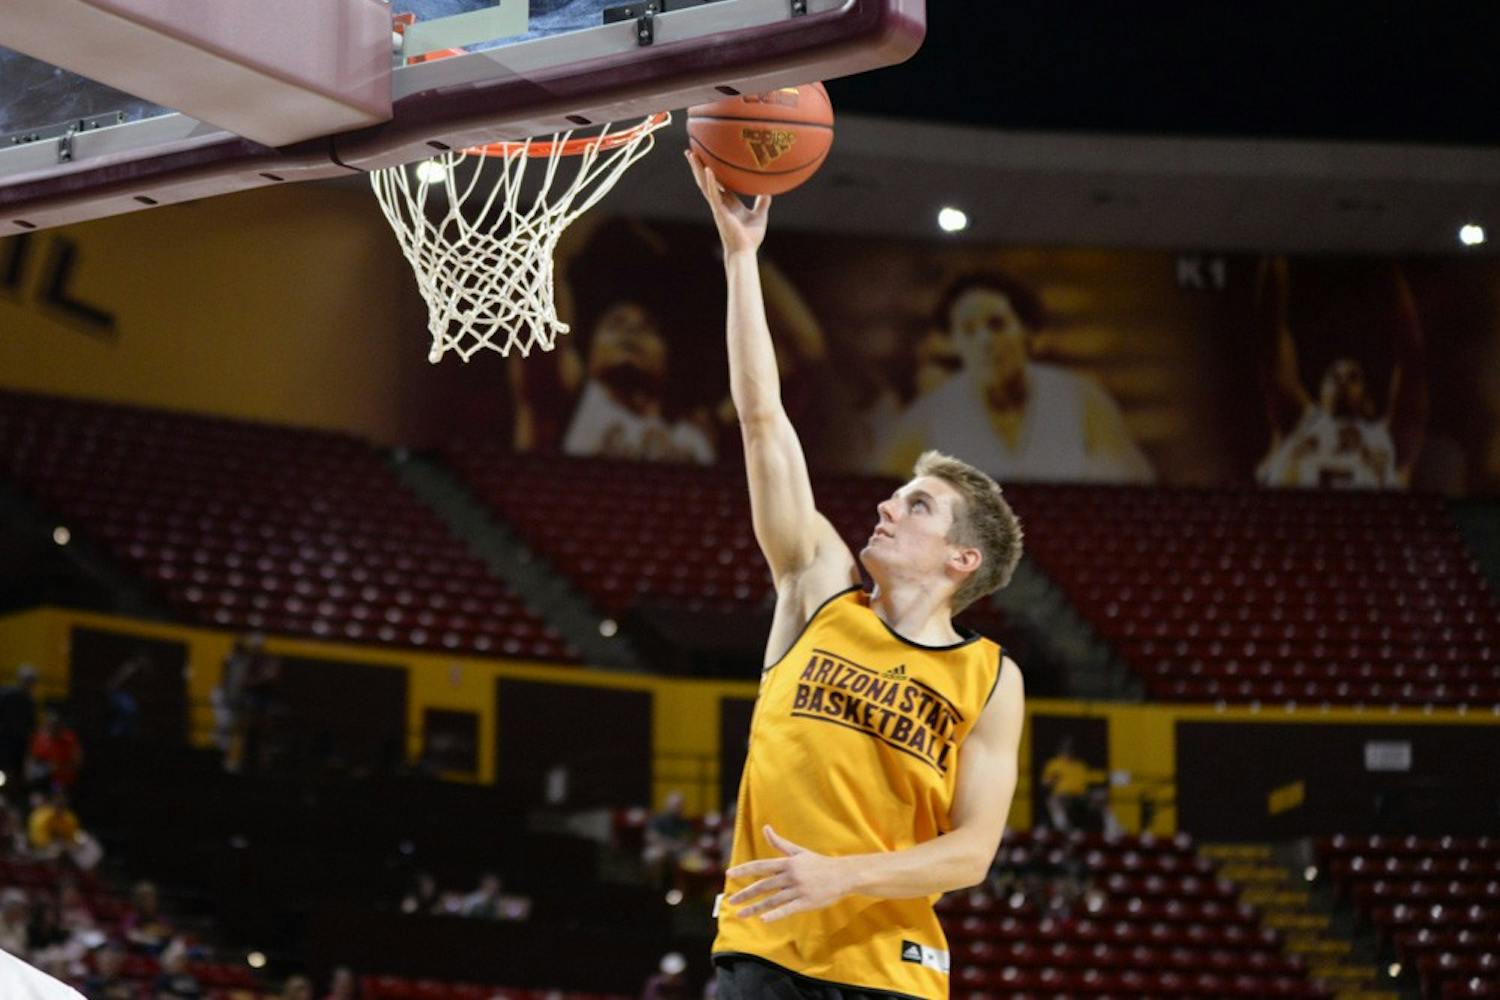 Sophomore guard Austin Withereill takes the ball to the hoop during the men's intra-squad scrimmage on Friday, Oct. 9, 2015, at Wells Fargo Arena in Tempe.